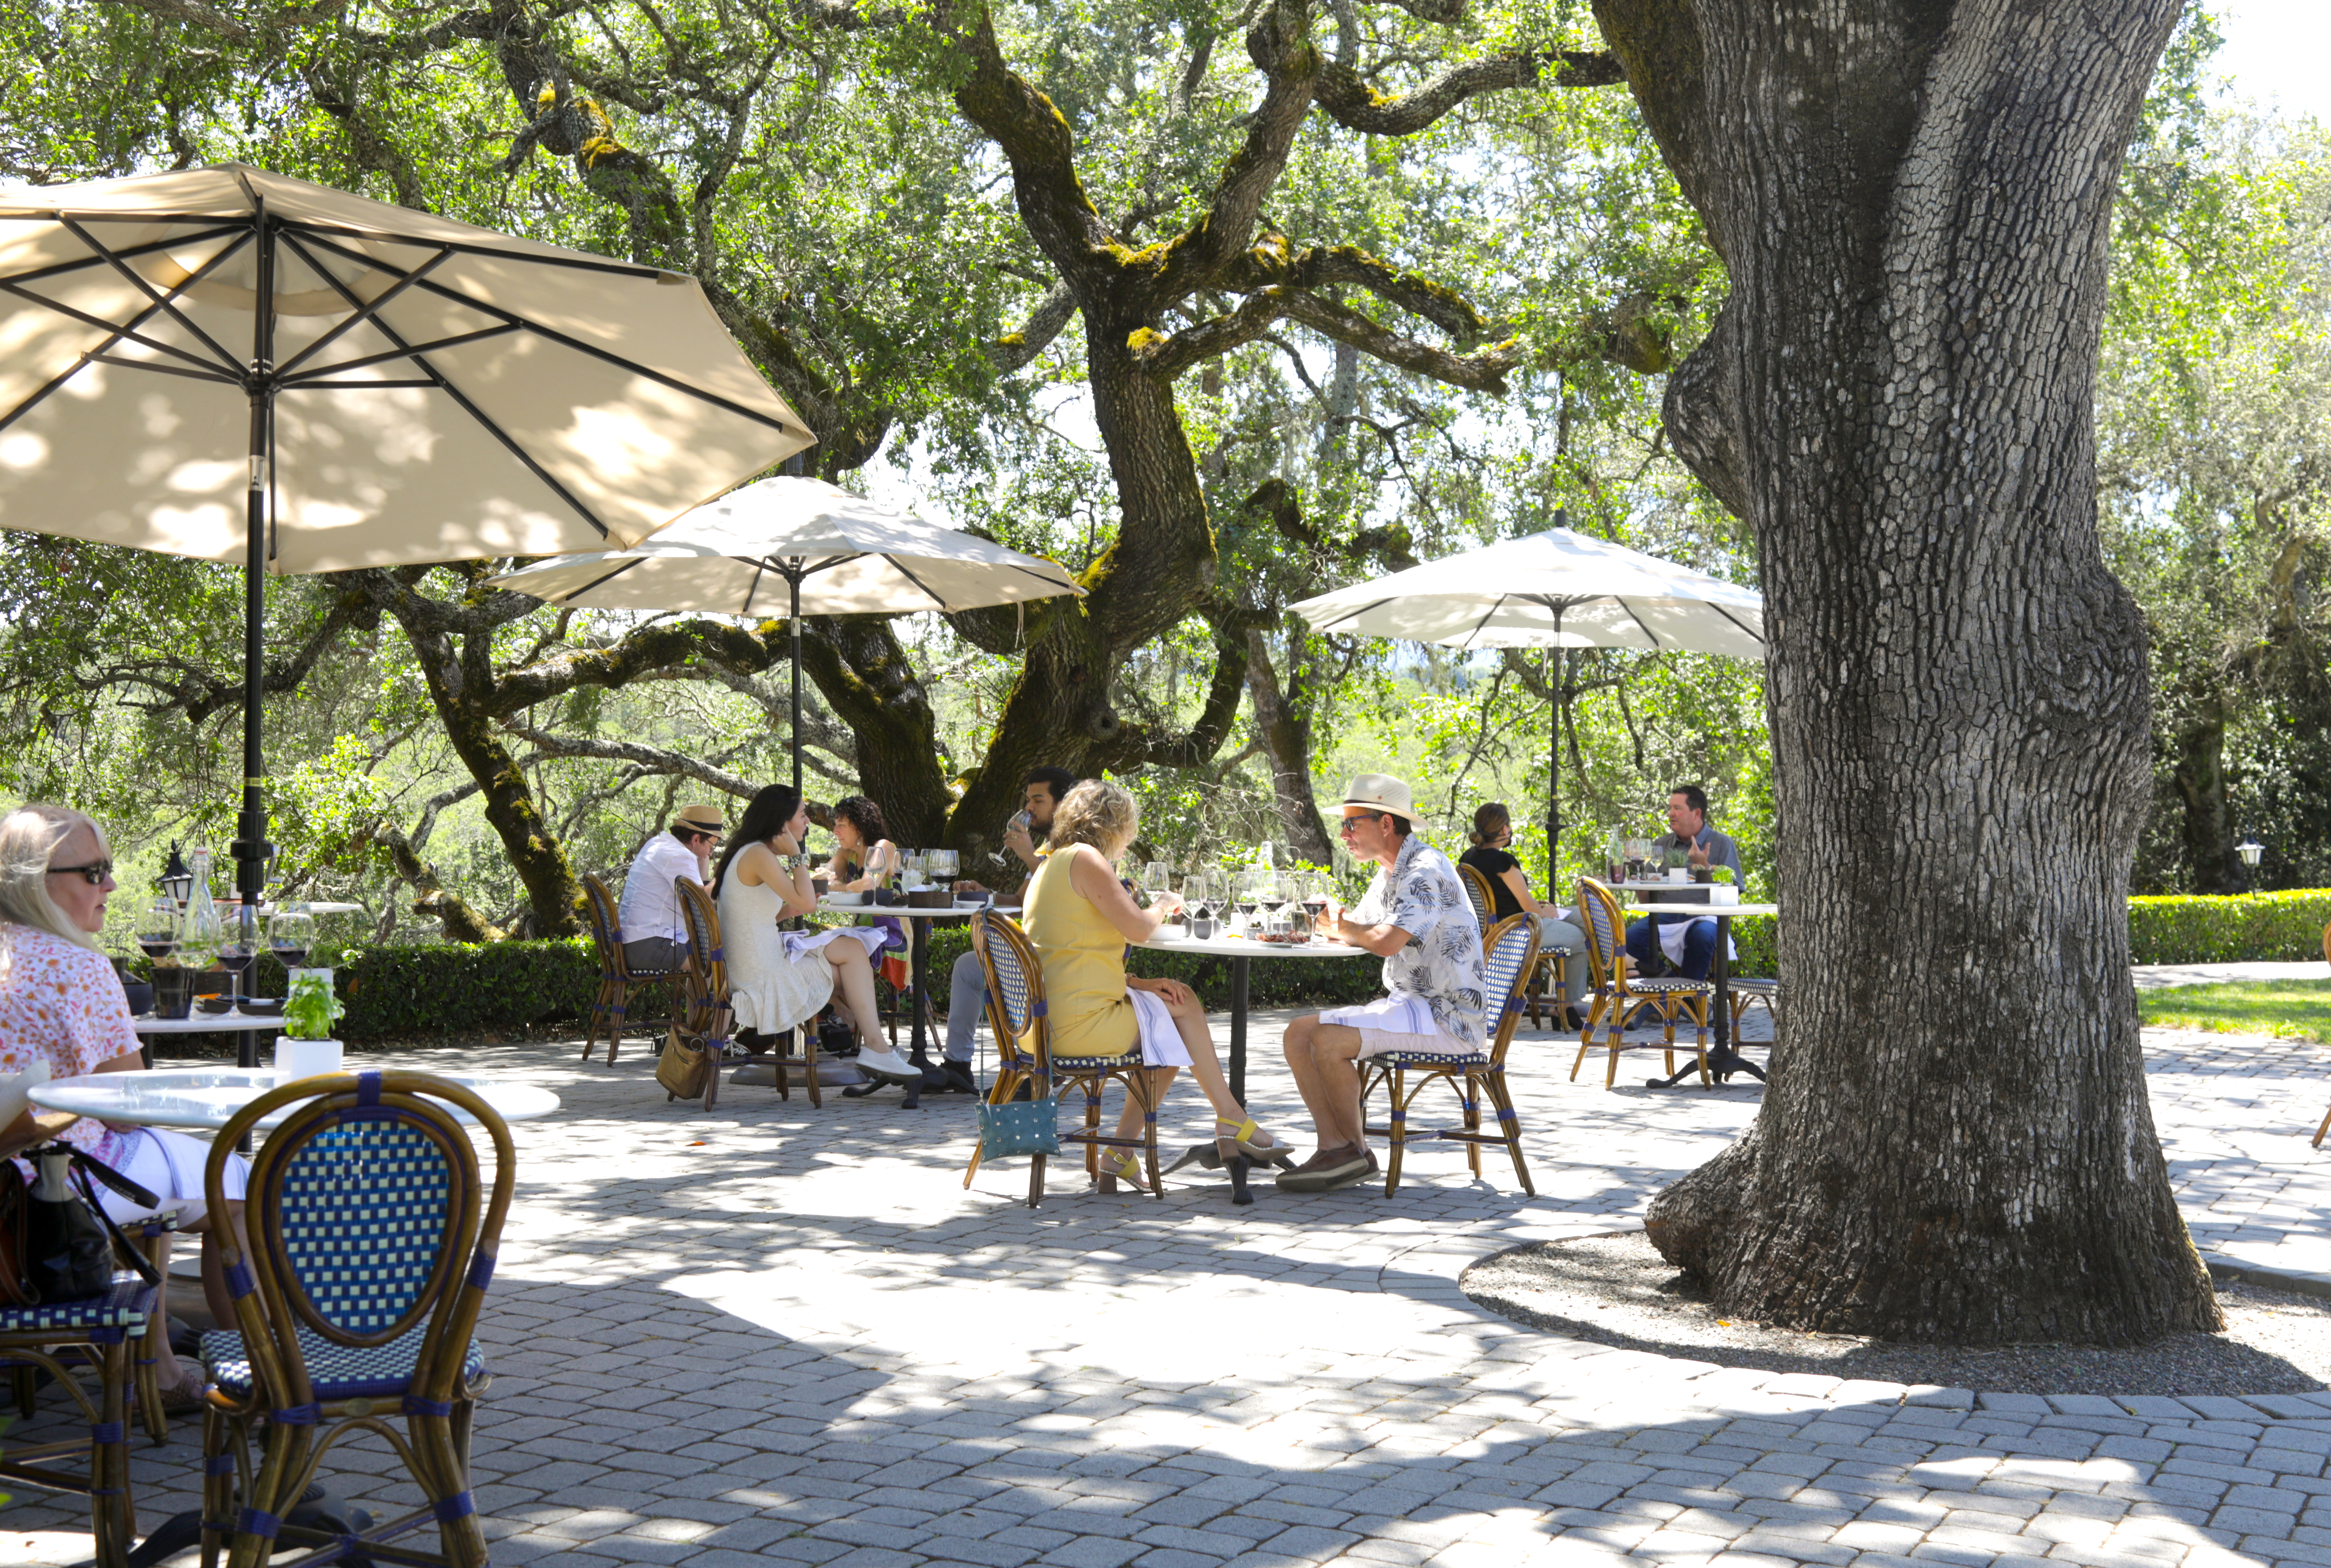 people sitting at bistro tables outdoors under umbrellas and oak trees